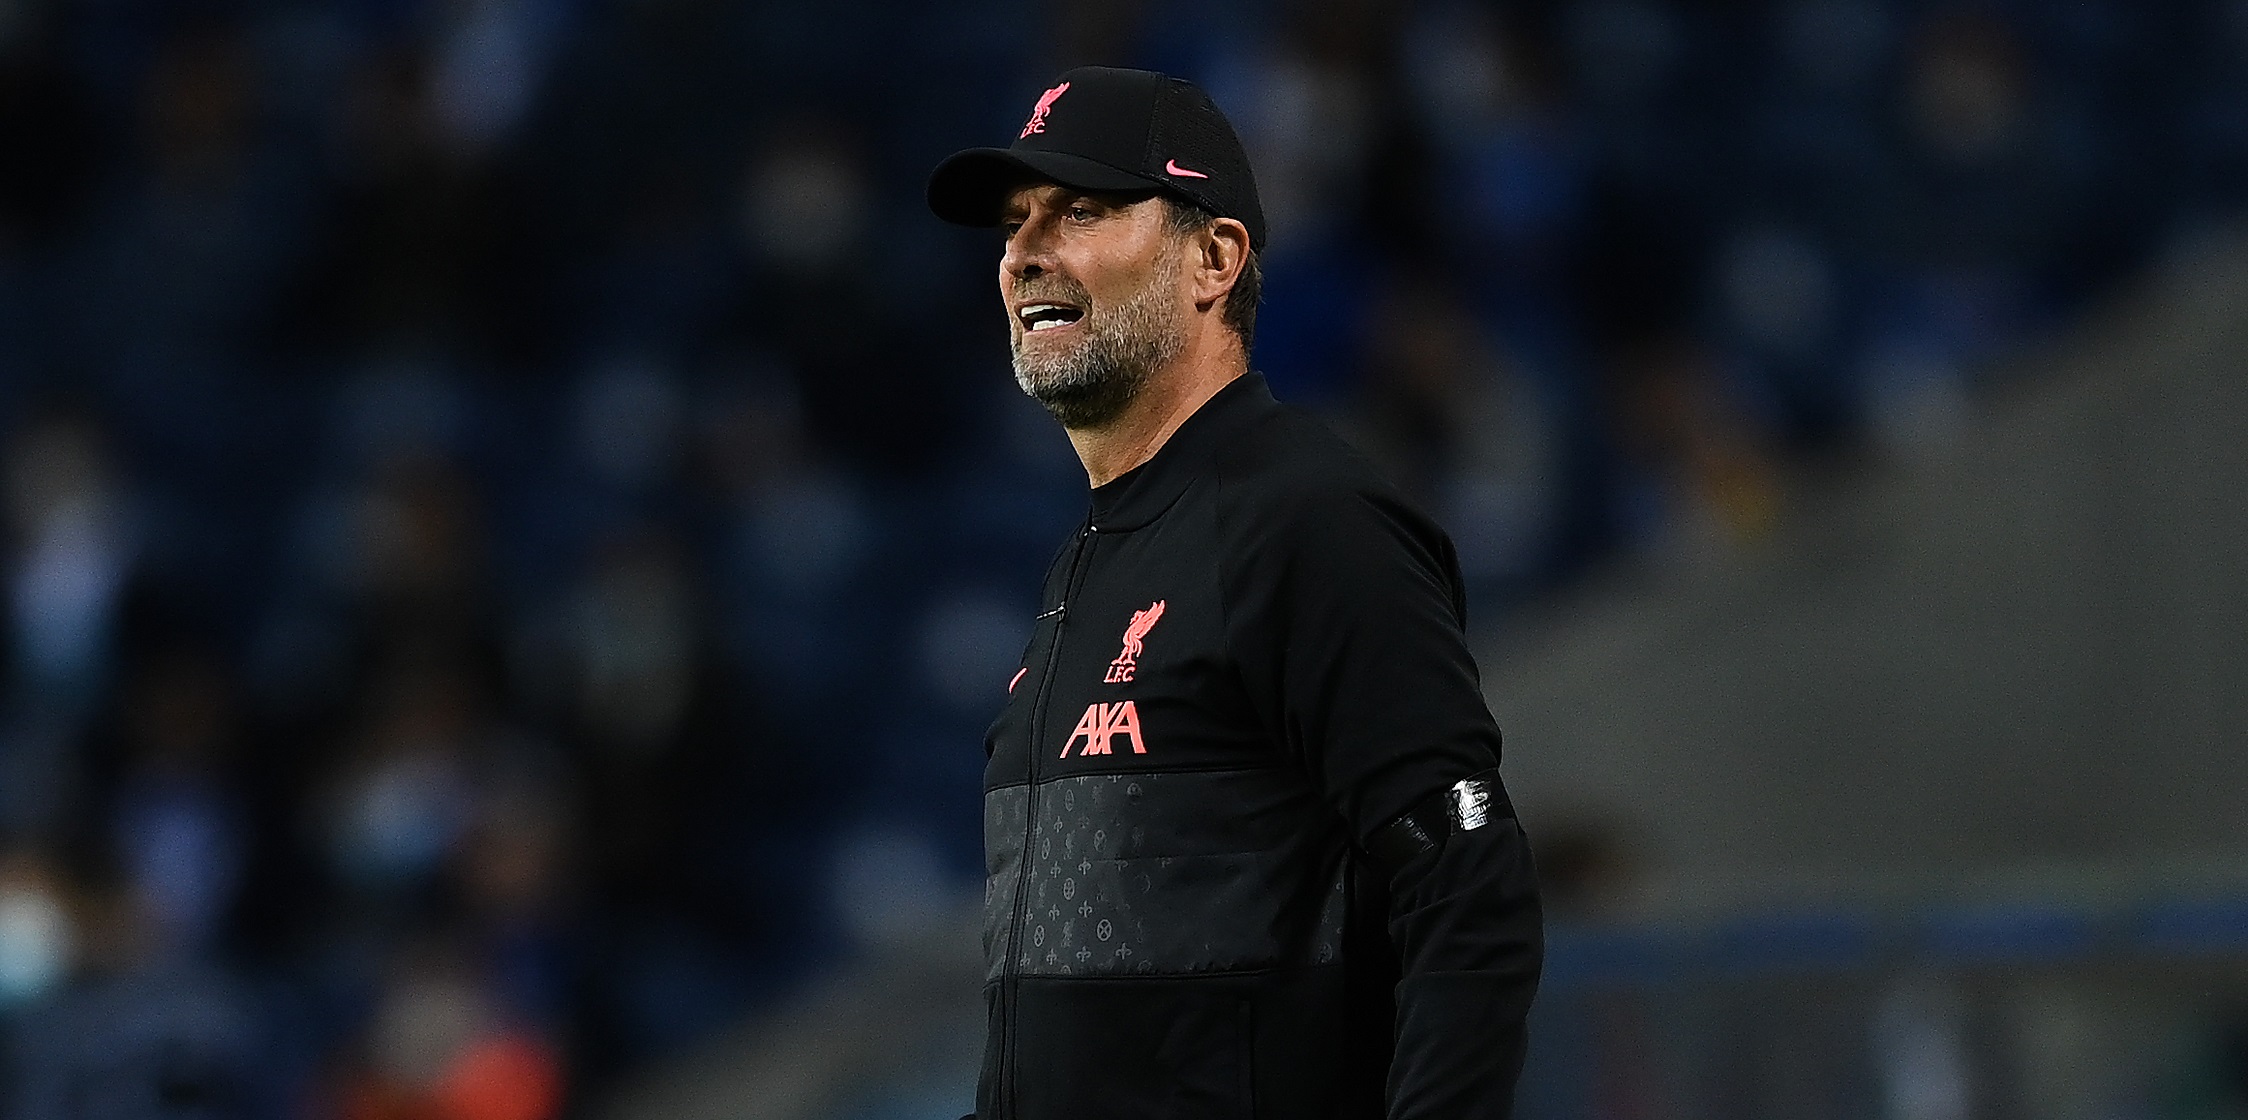 Barcelona identify Klopp as top candidate to replace Koeman – report